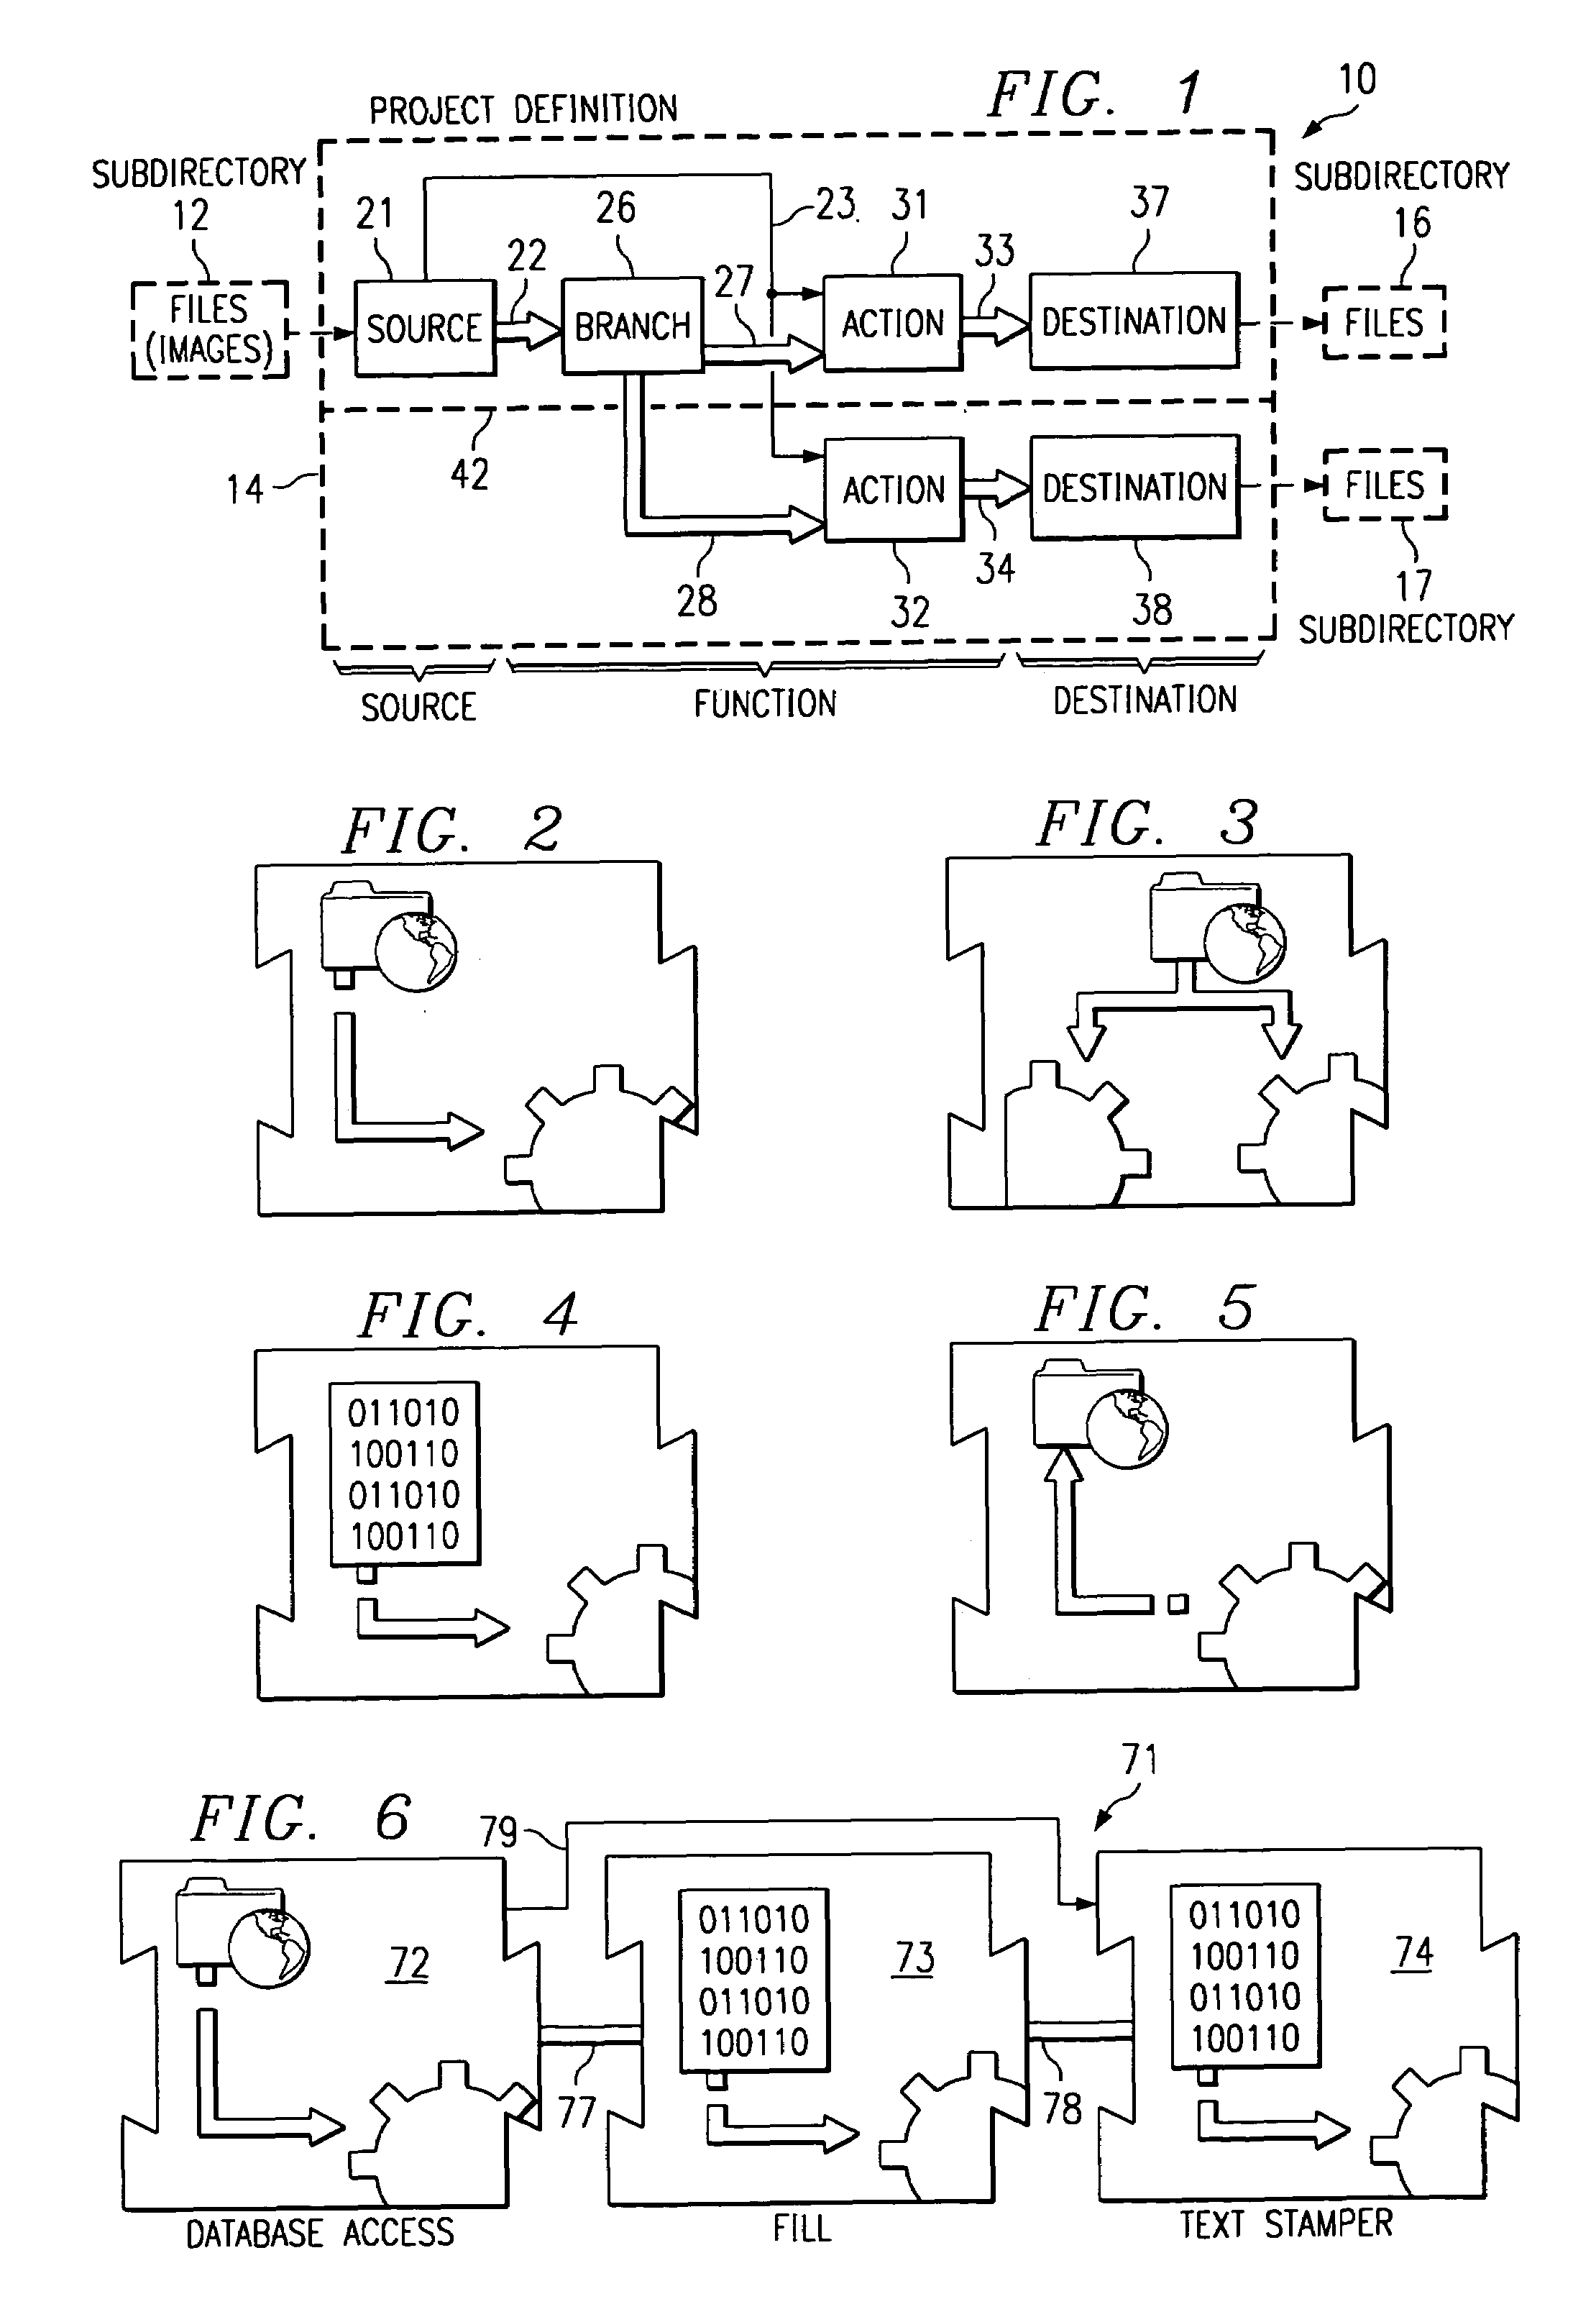 Method and apparatus for communicating during automated data processing